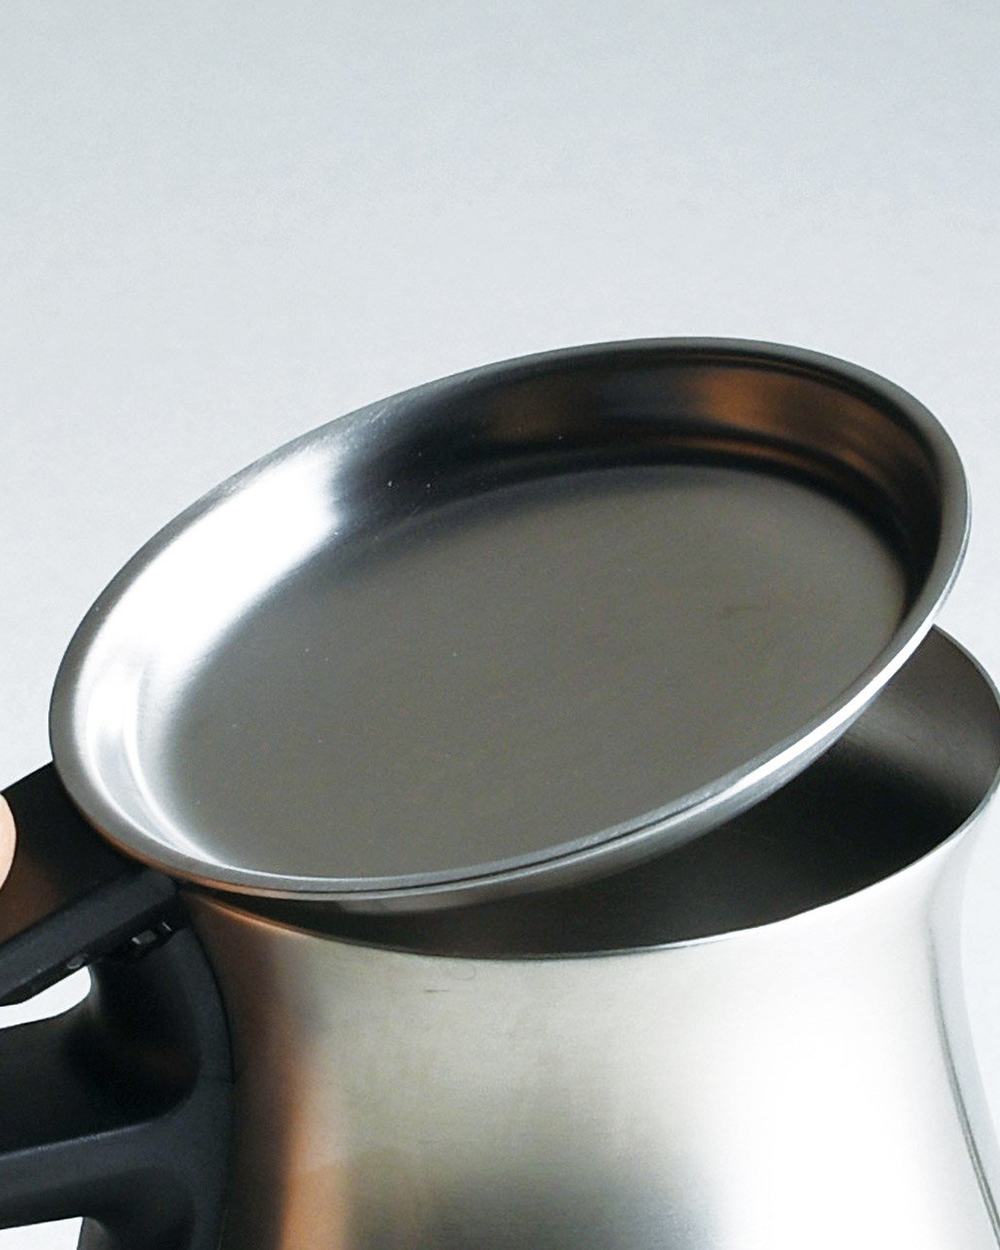 Pour Over Kettle - Matte Stainless Steel